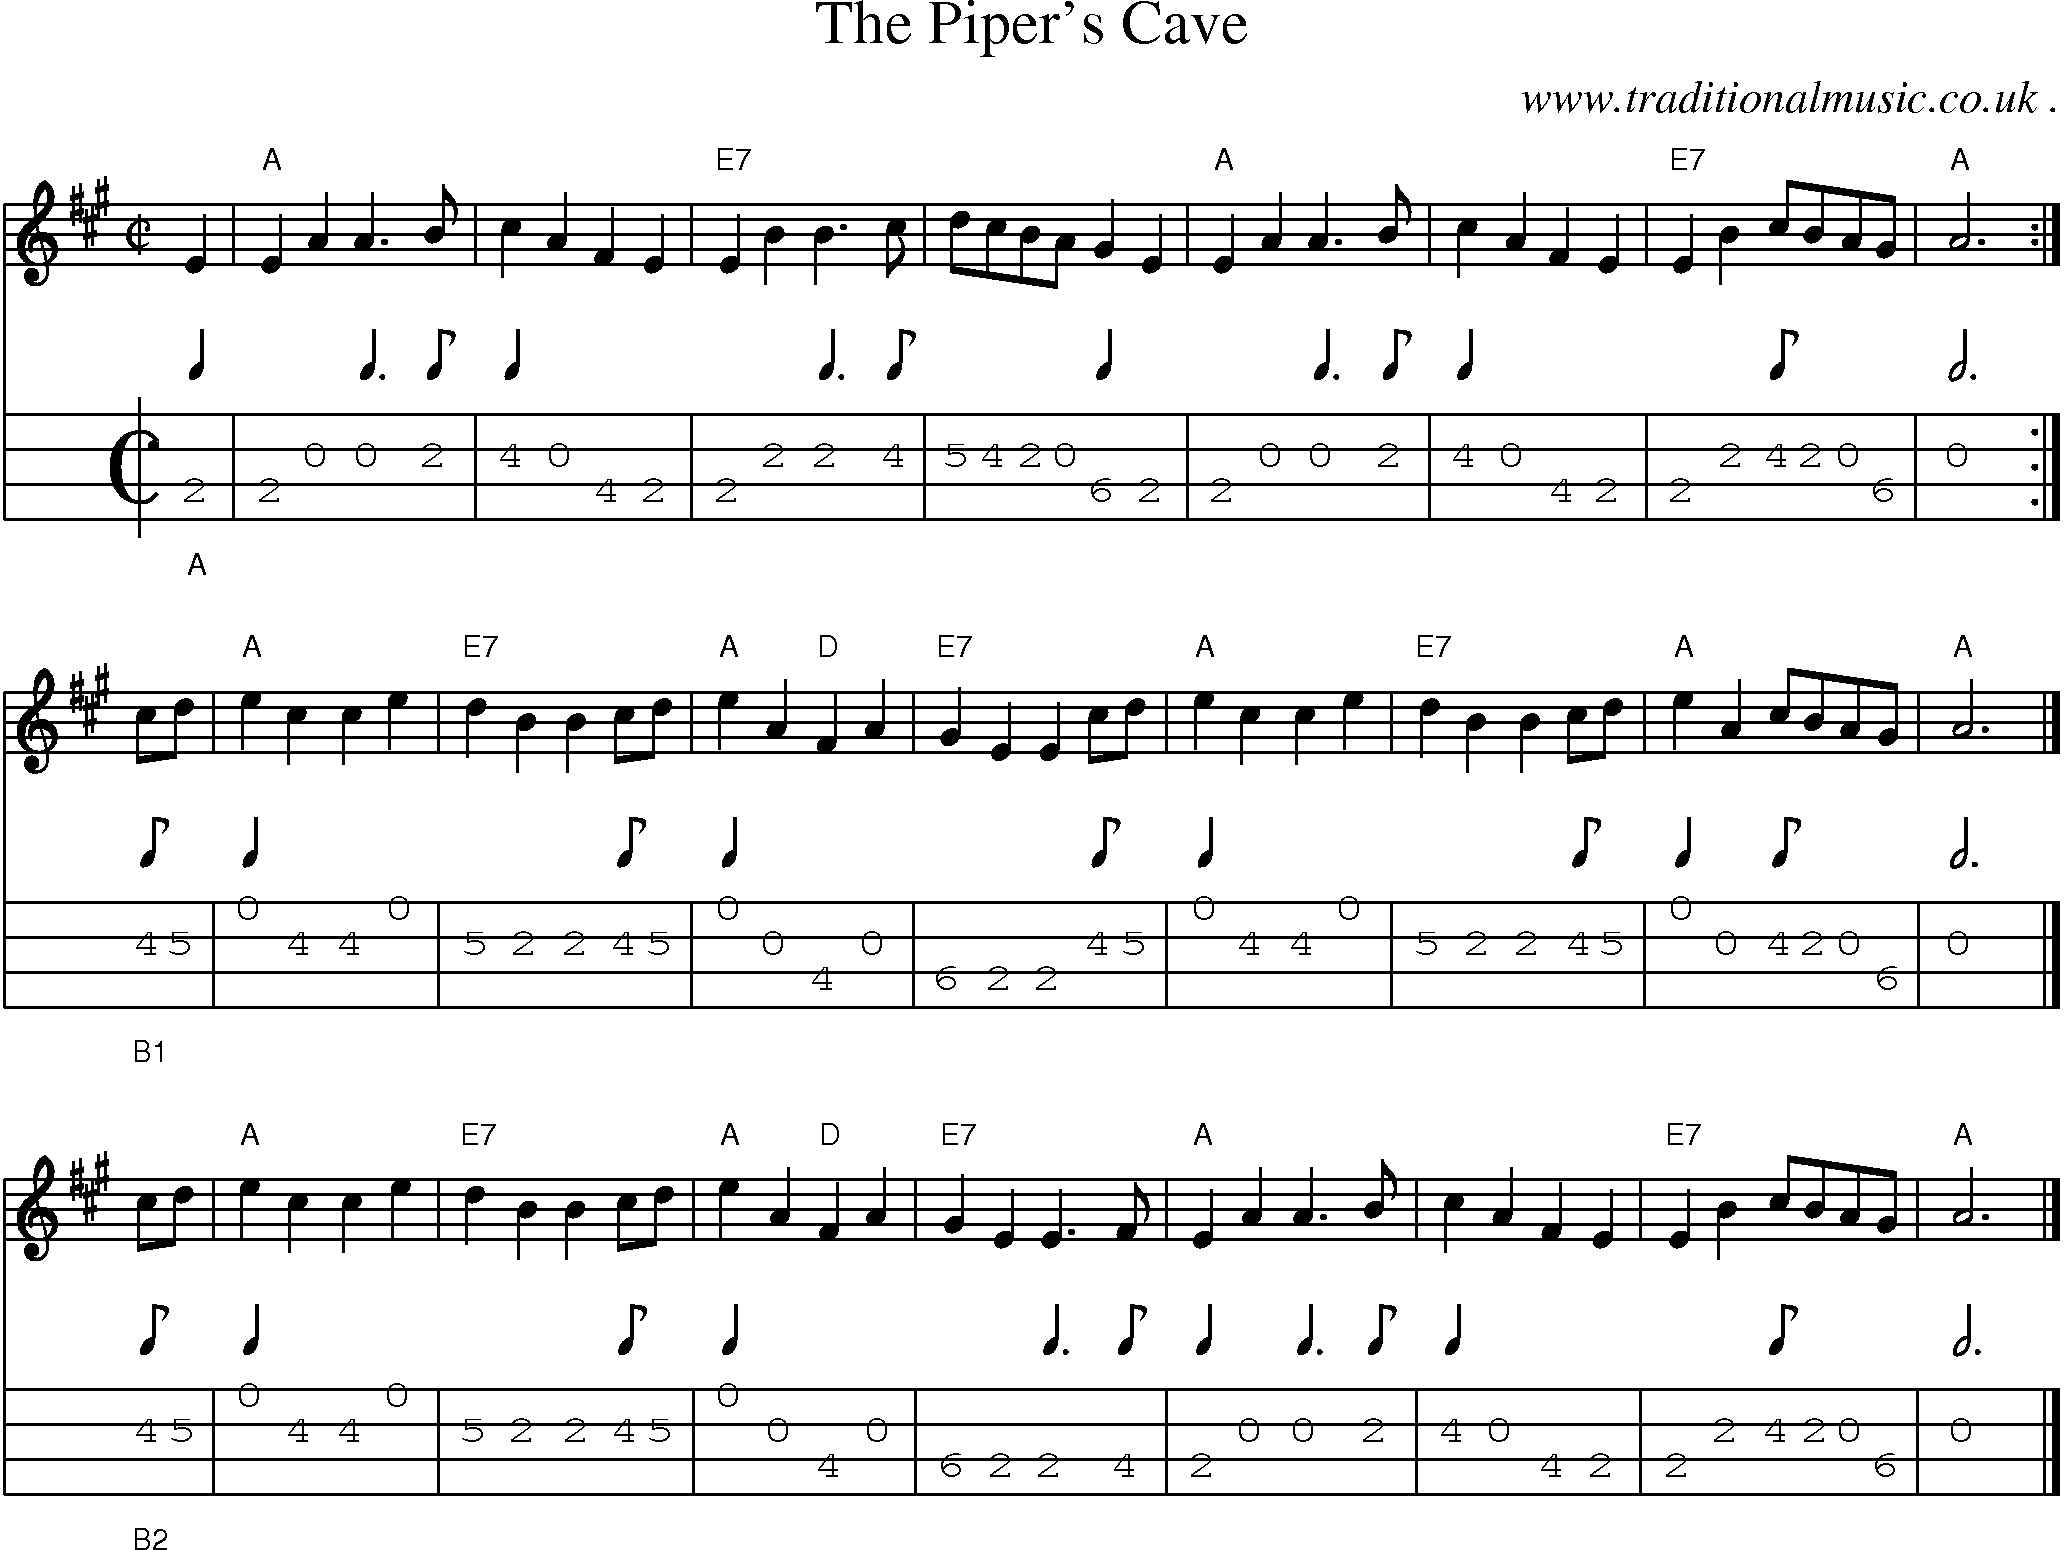 Sheet-music  score, Chords and Mandolin Tabs for The Pipers Cave